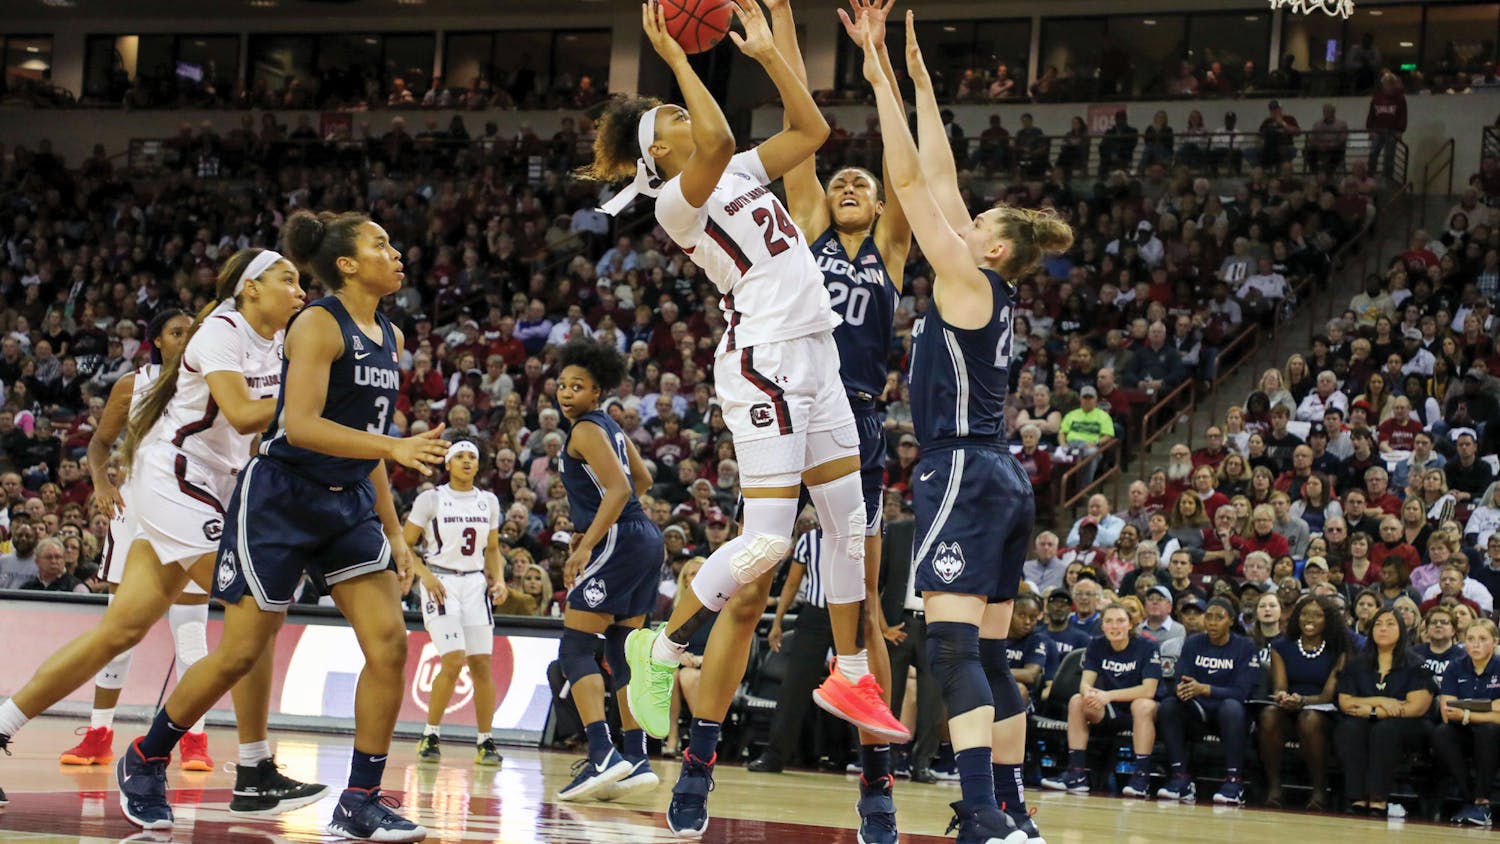 Graduate student guard LeLe Grissett shoots the ball over UConn defenders on Feb. 10, 2020. South Carolina women's basketball won the first game against UConn in school history 70-52.